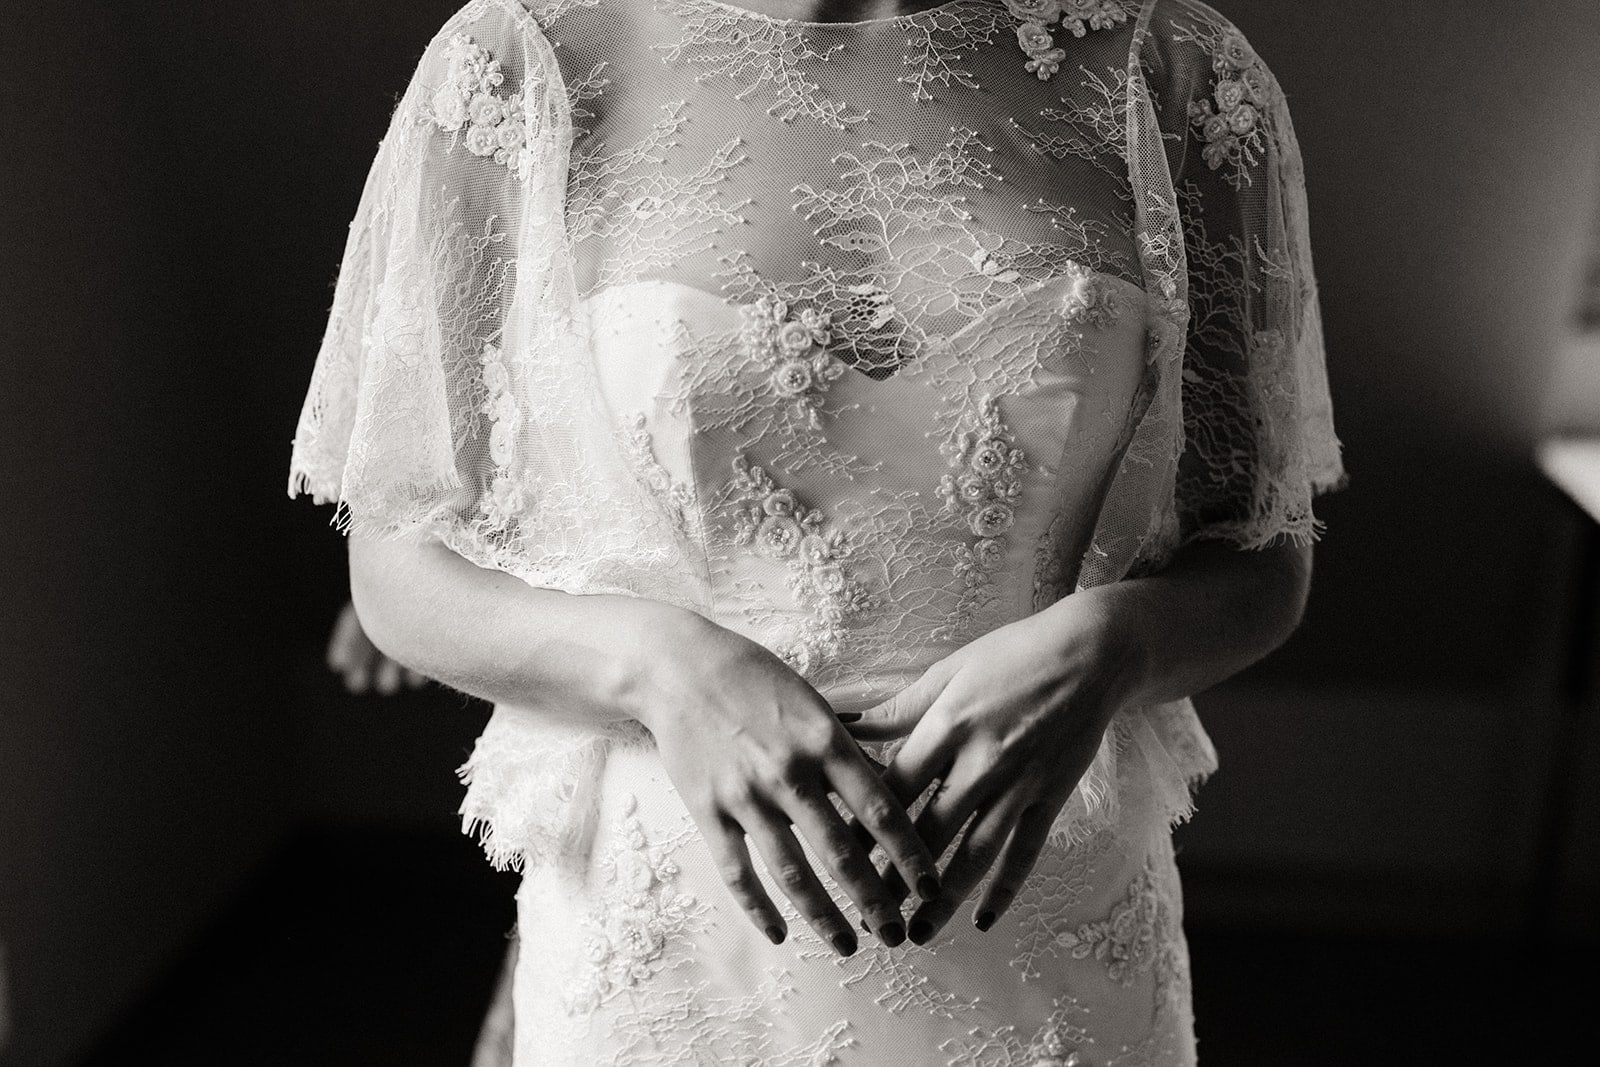 A black and white detail of the brides second dress.